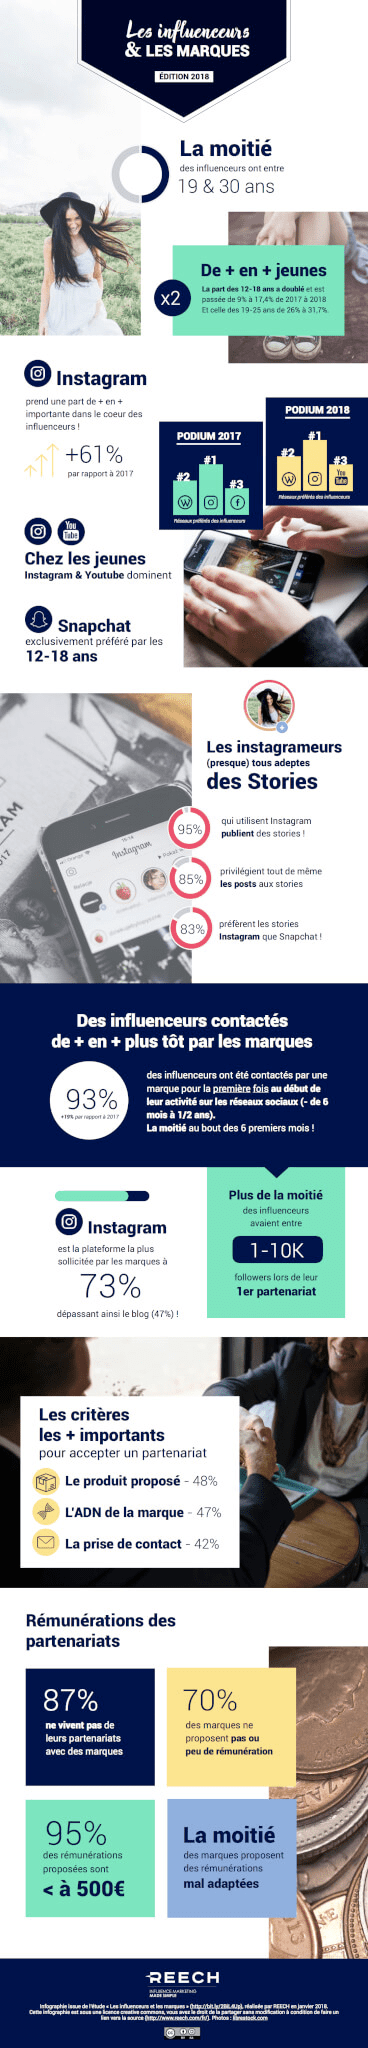 influenceurs marques infographie image infographie